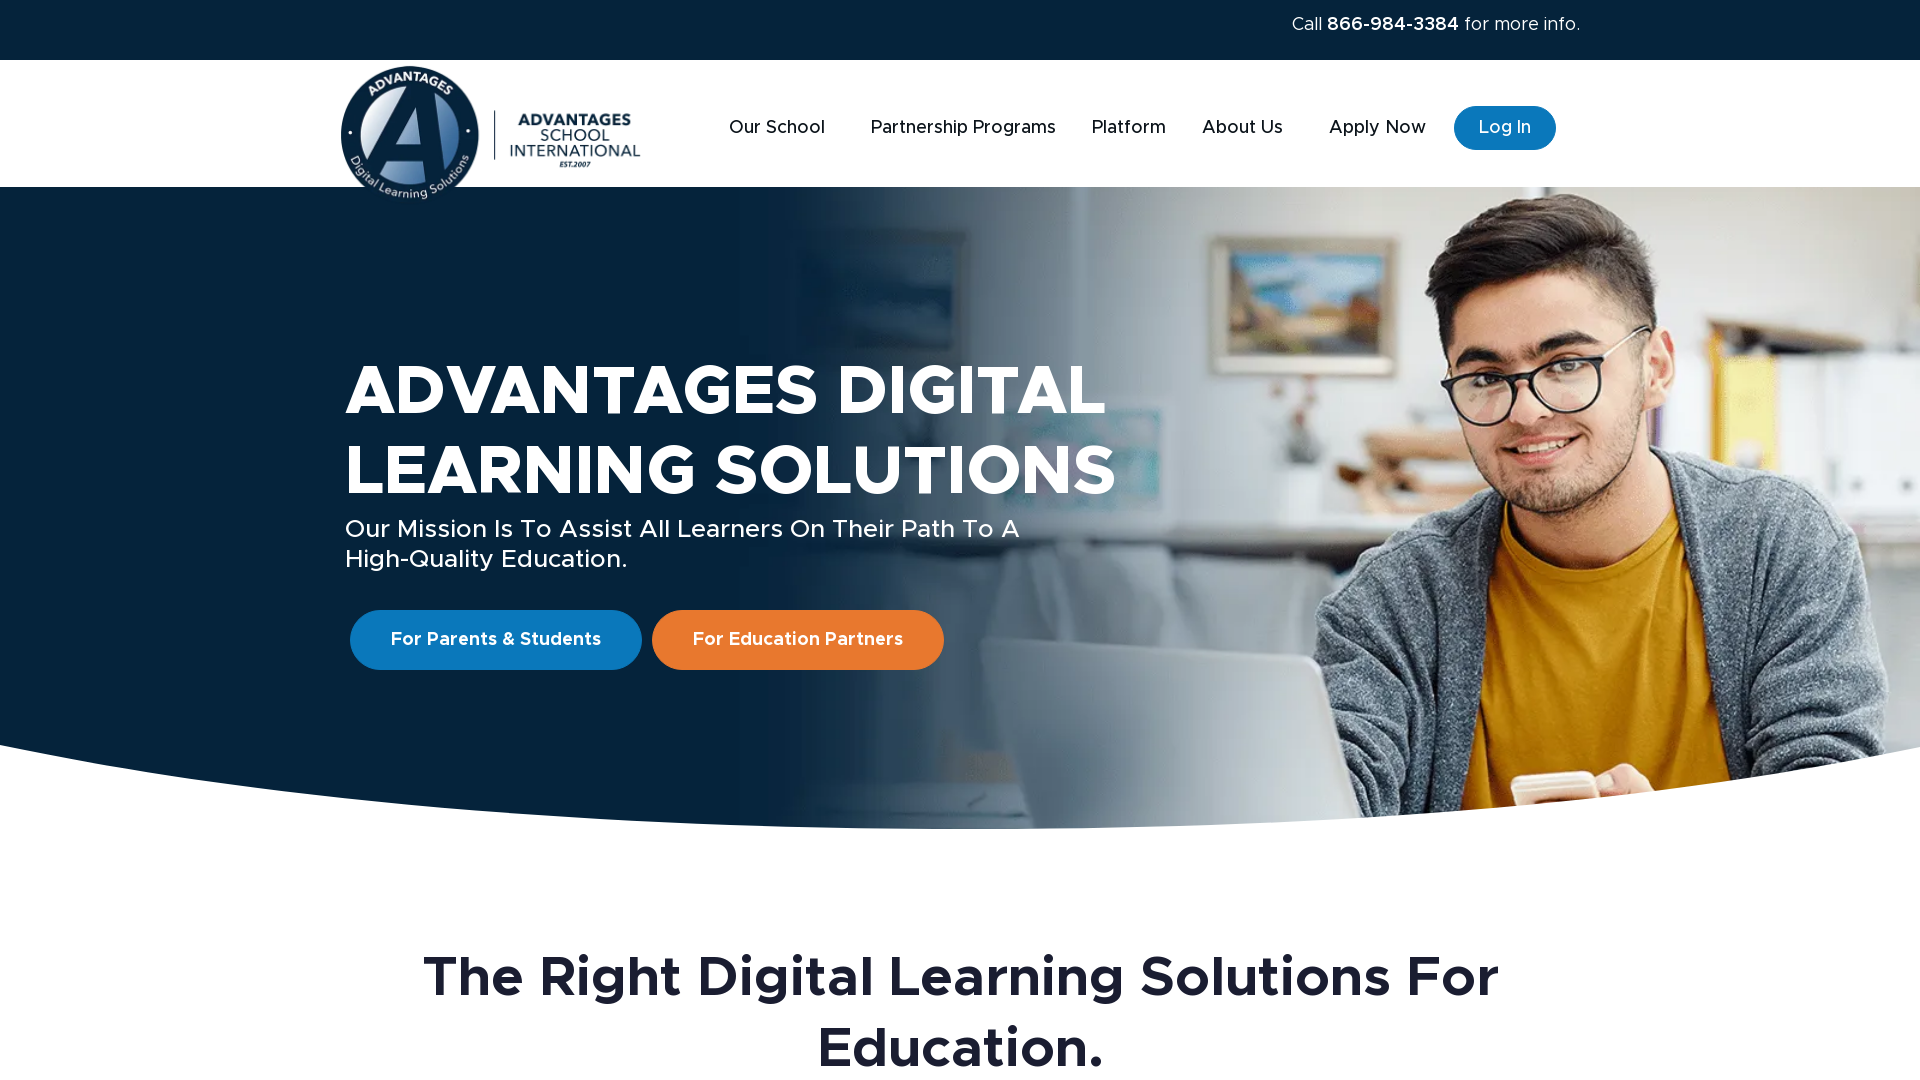 ADVANTAGES Digital Learning Solutions